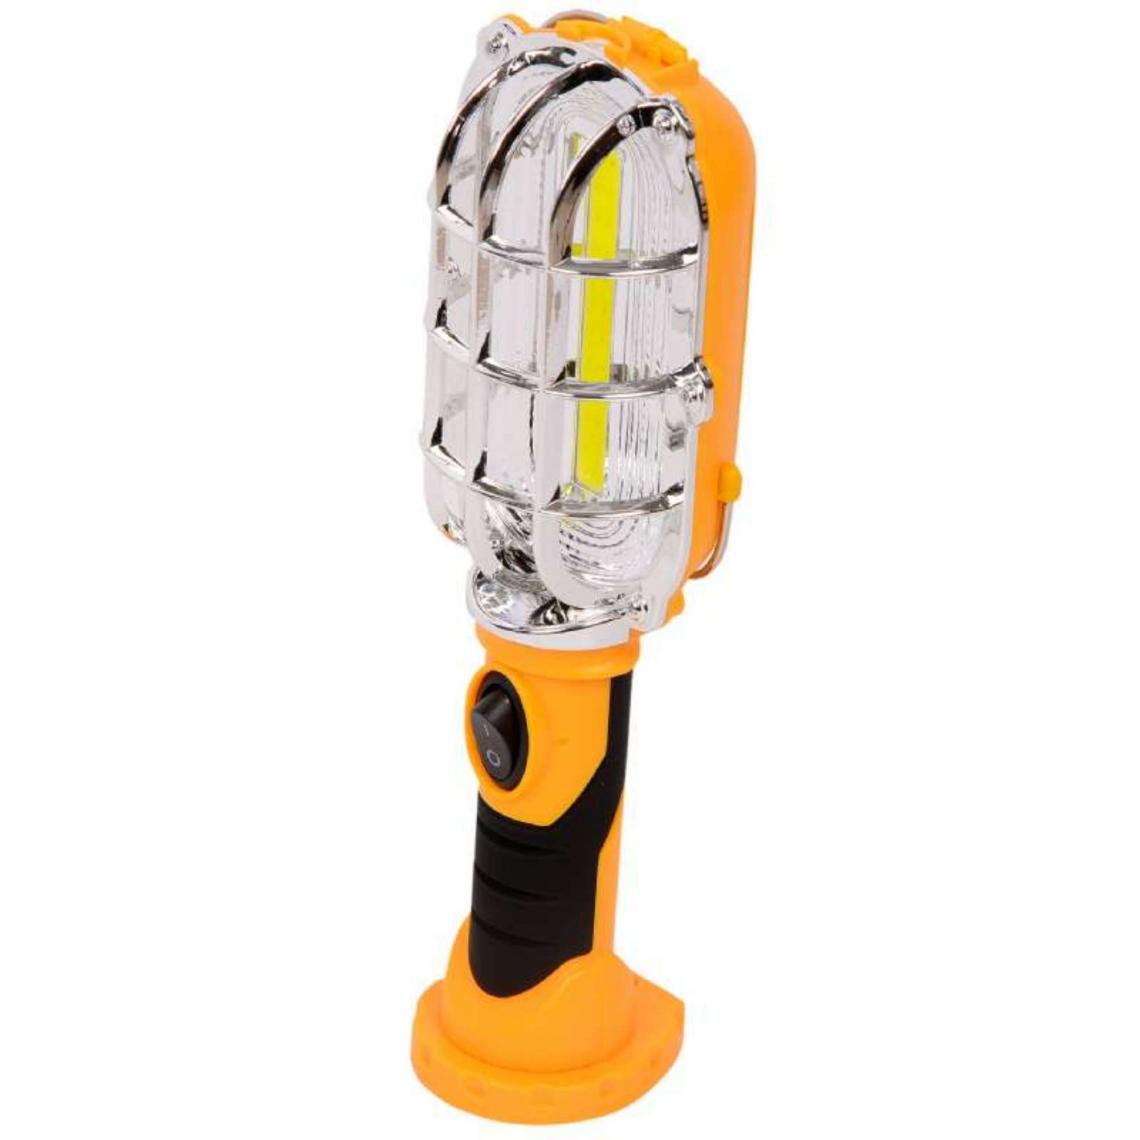 Provence Outillage - Lampe baladeuse LED Handy Bright 500 lumens - Tubes et néons